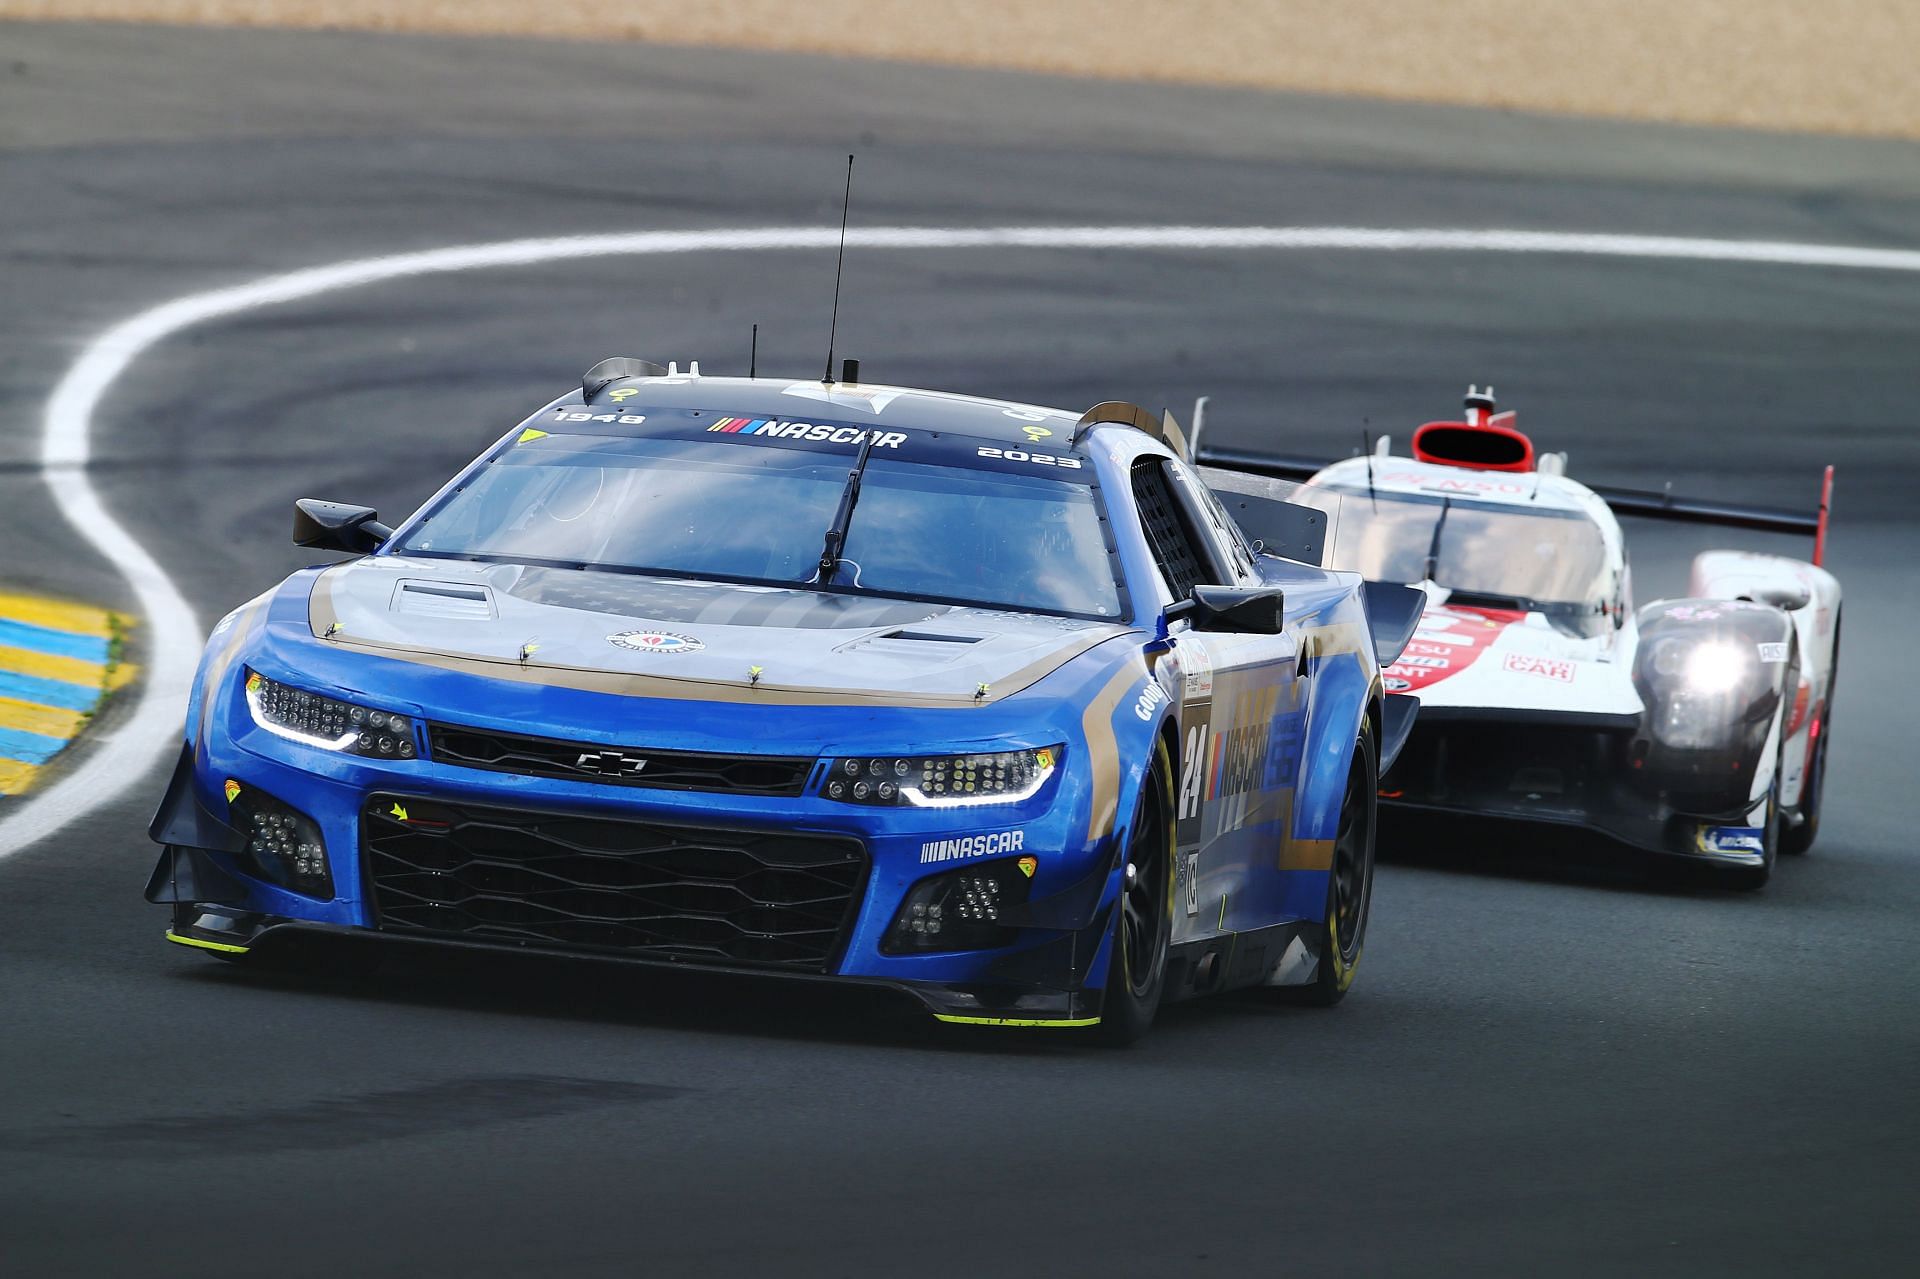 At 24 Hours of Le Mans, NASCAR Is Out of Its Element - The New